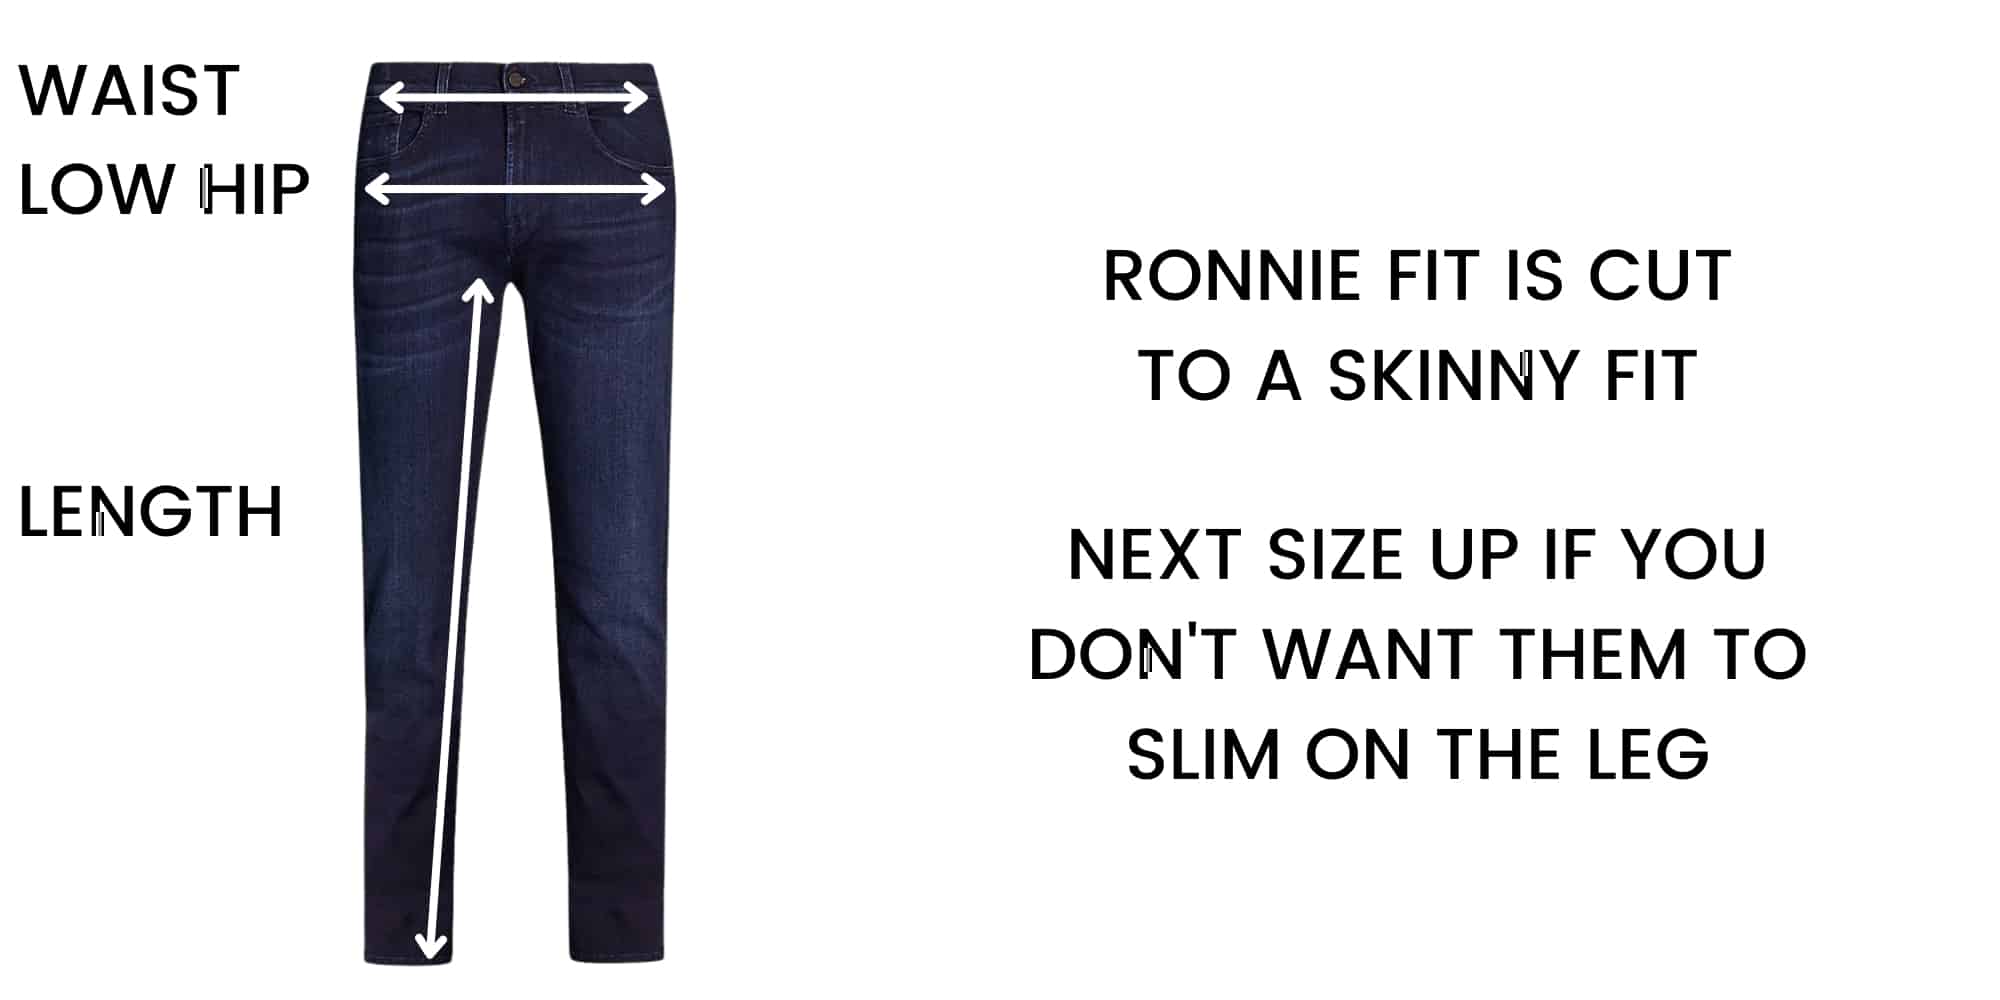 7 FOR ALL MANKIND RONNIE SIZE CHART